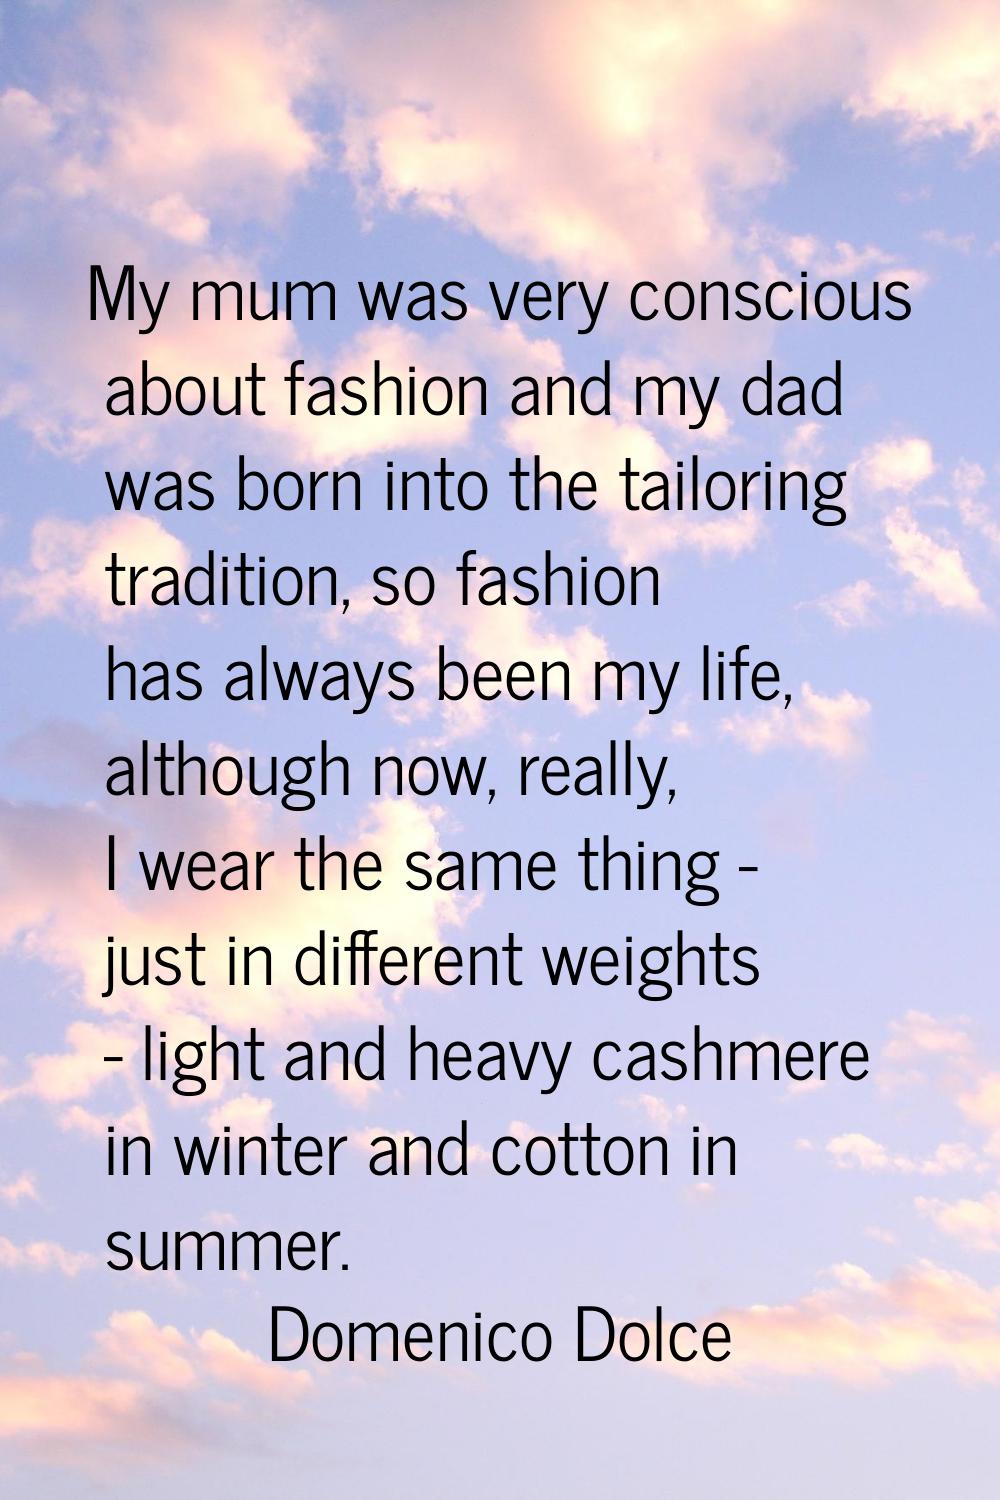 My mum was very conscious about fashion and my dad was born into the tailoring tradition, so fashio